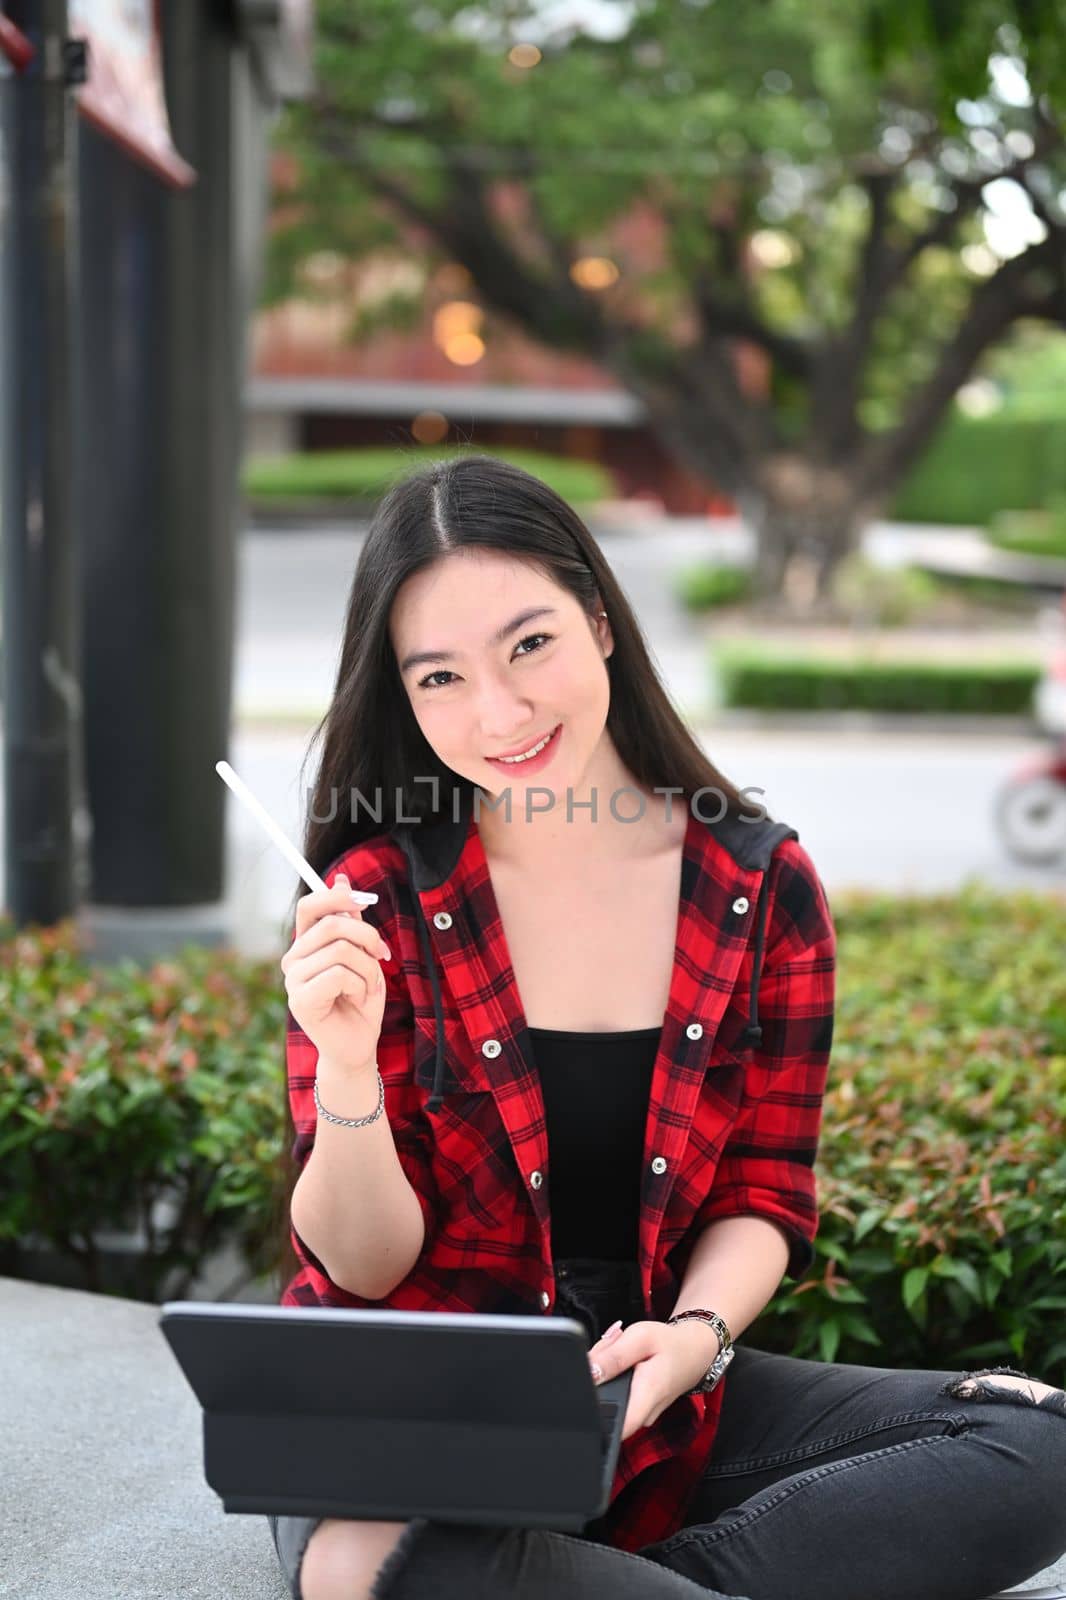 Smiling young woman holding digital tablet and smiling to camera while sitting at outdoor. by prathanchorruangsak